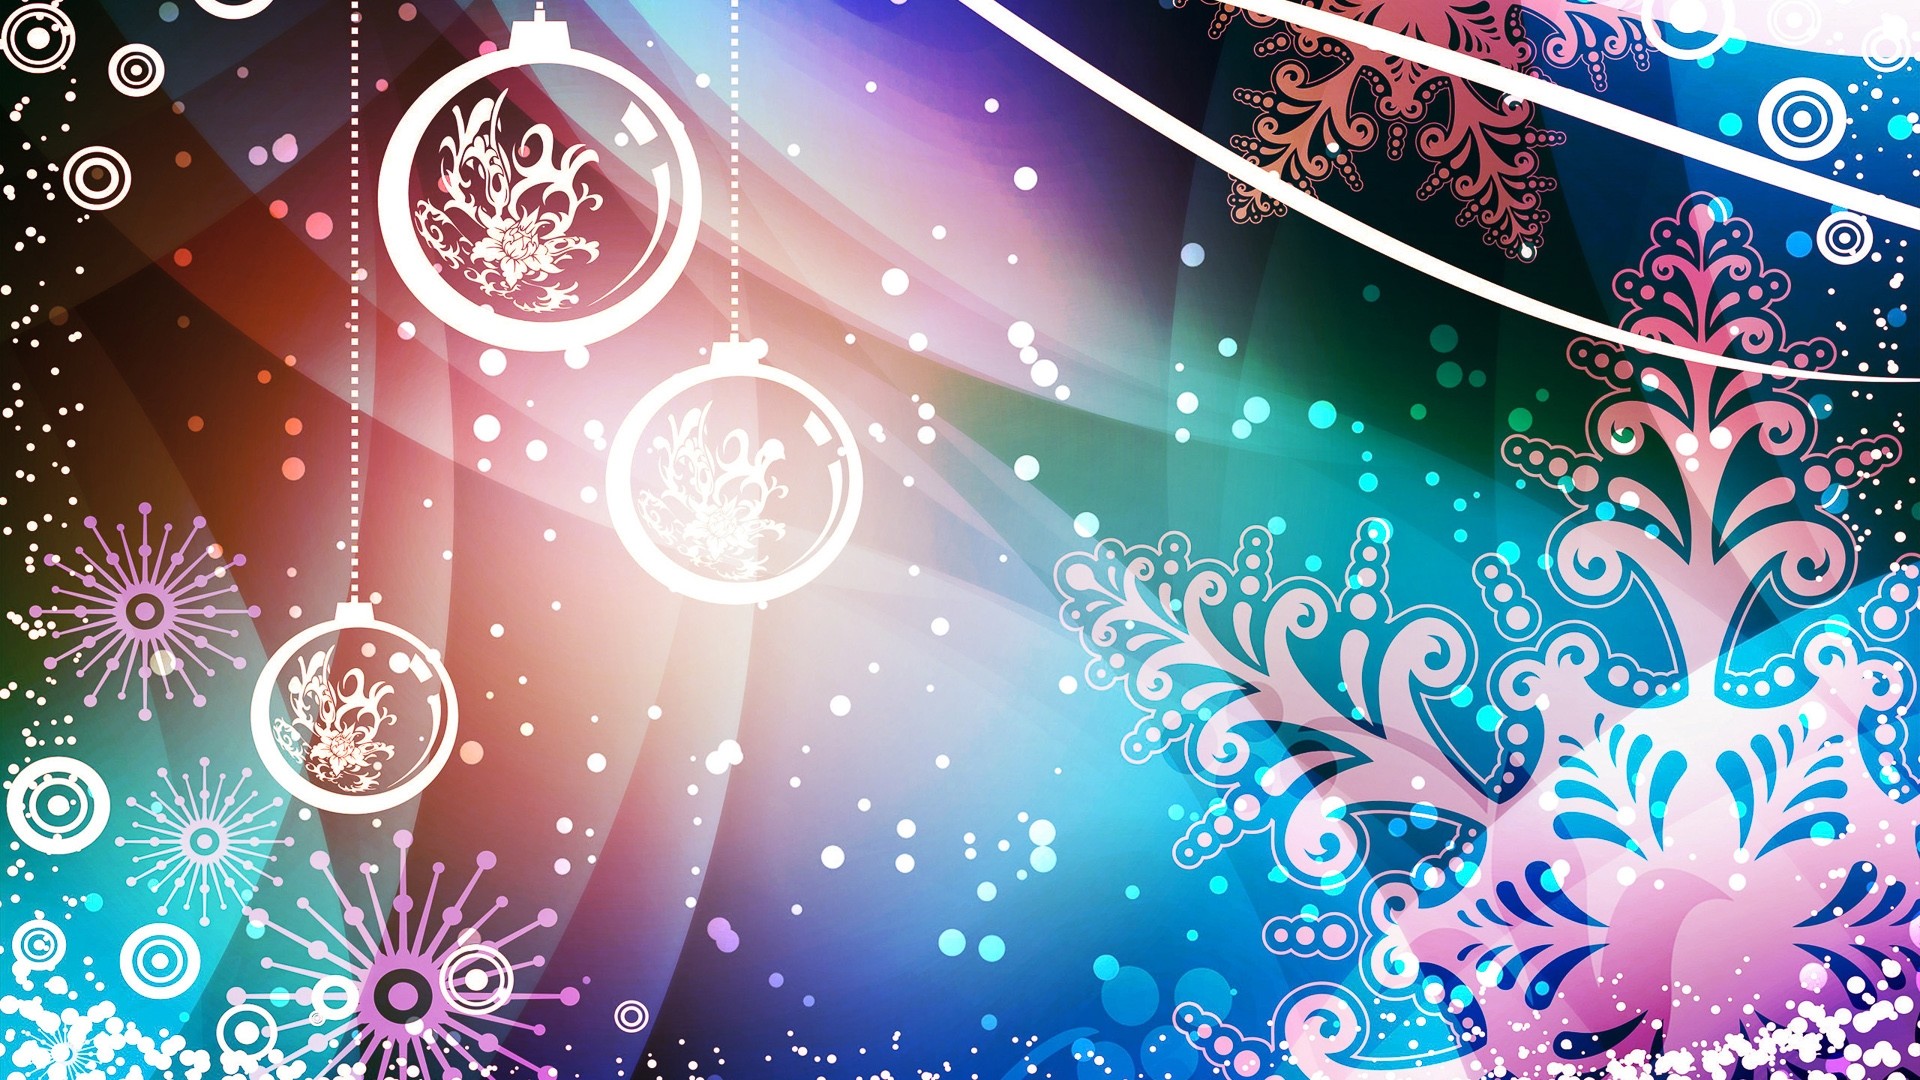 1920x1080 Download now full hd wallpaper christmas pattern toy snowfall ...